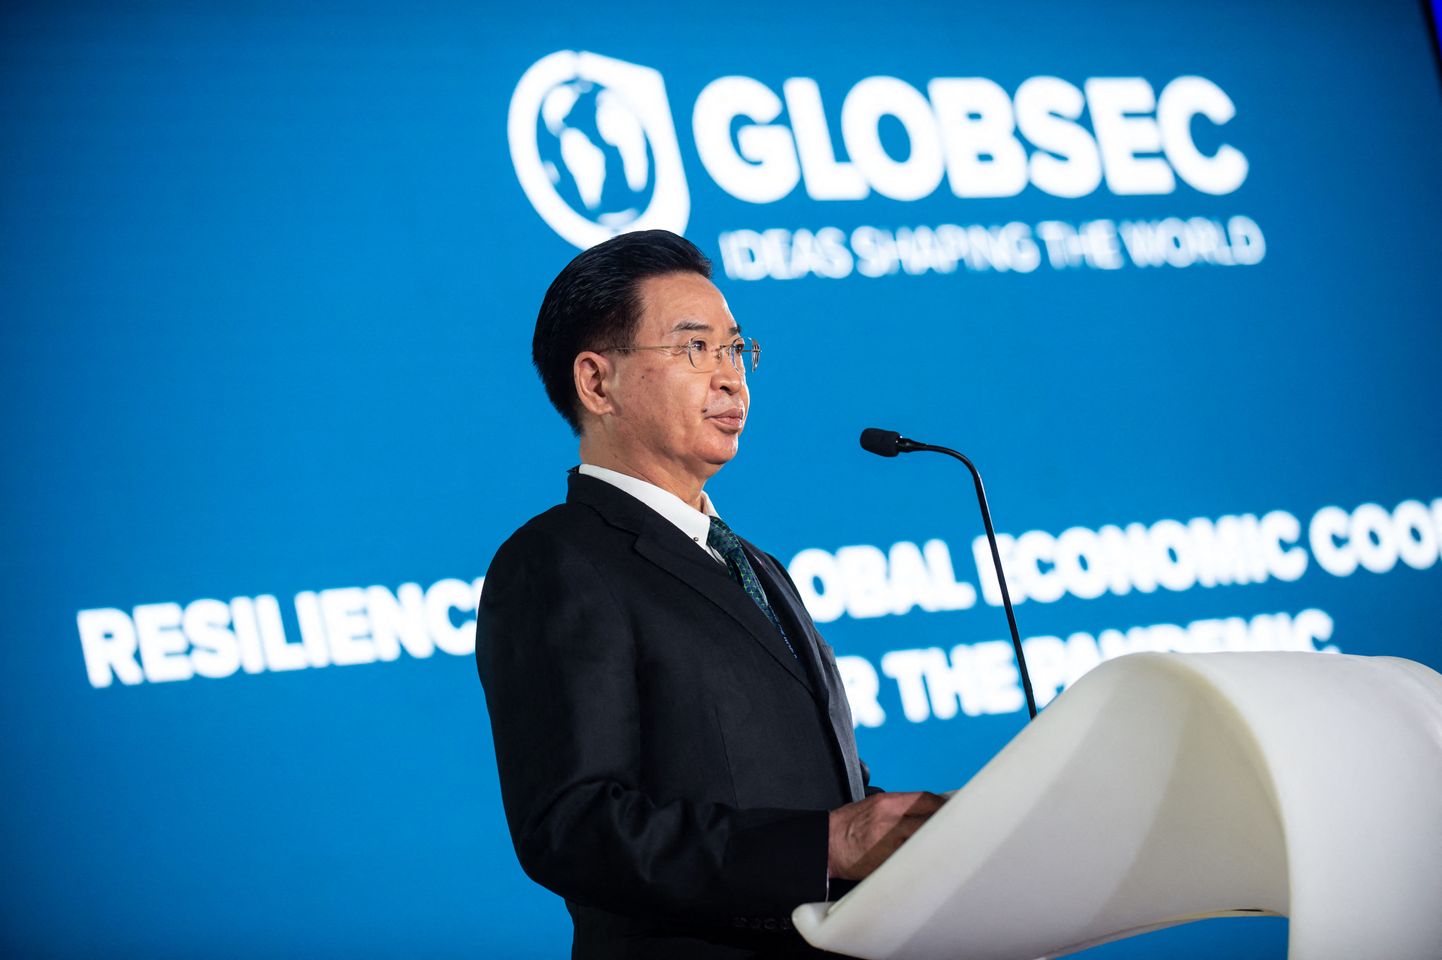 Taiwanese Foreign Minister Joseph Wu speaks at Globsec forum in Bratislava, Slovakia on October 26, 2021 during his visit to Slovakia and the Czech Republic. (Photo by VLADIMIR SIMICEK / AFP)